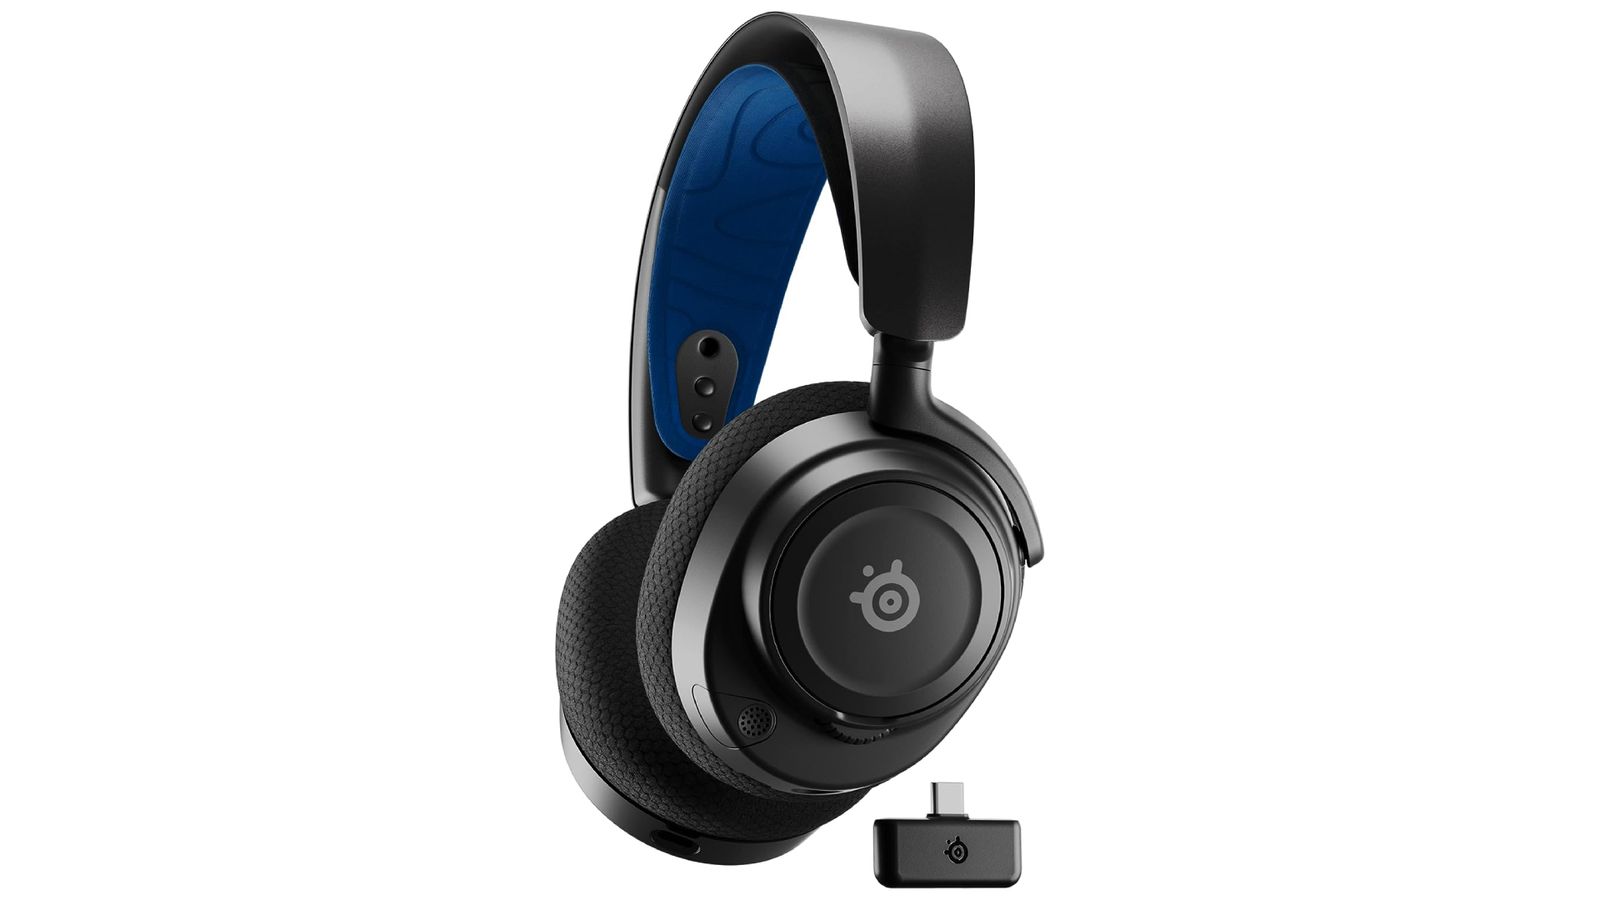 SteelSeries Arctis 7P product image of a black wireless over-ear headset with dark blue cushioning.